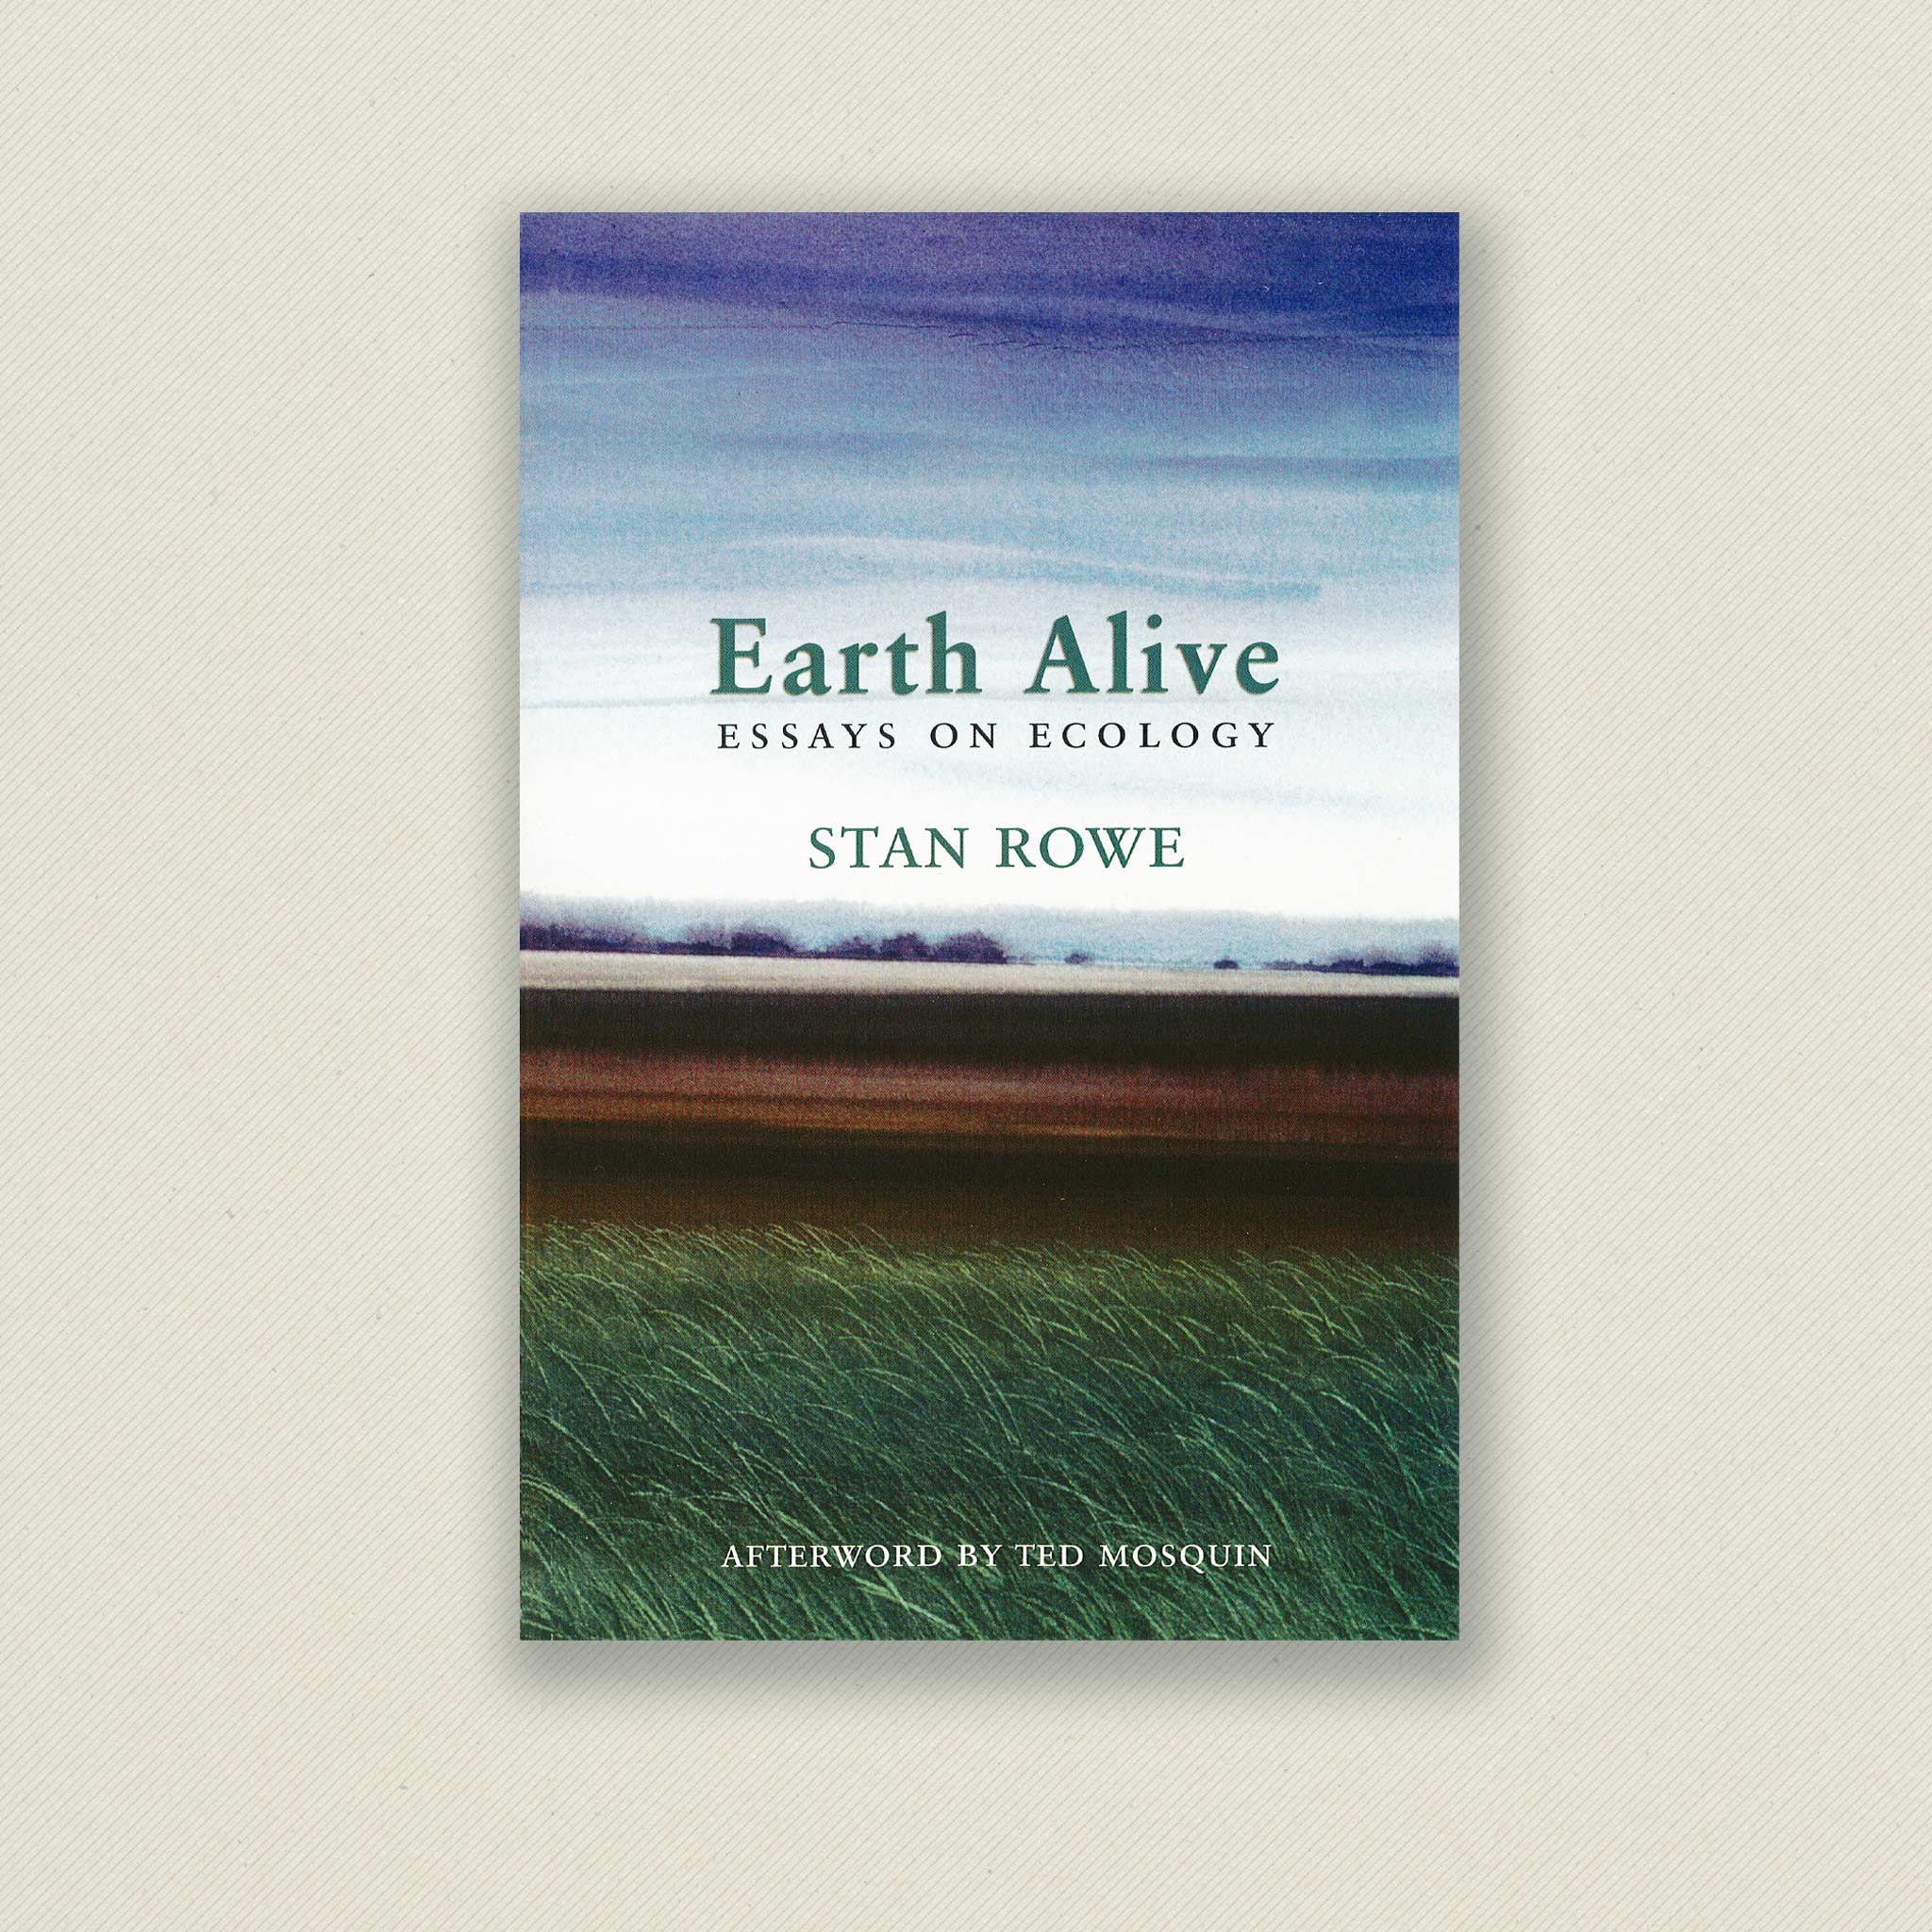 Earth Alive: Essays On Ecology